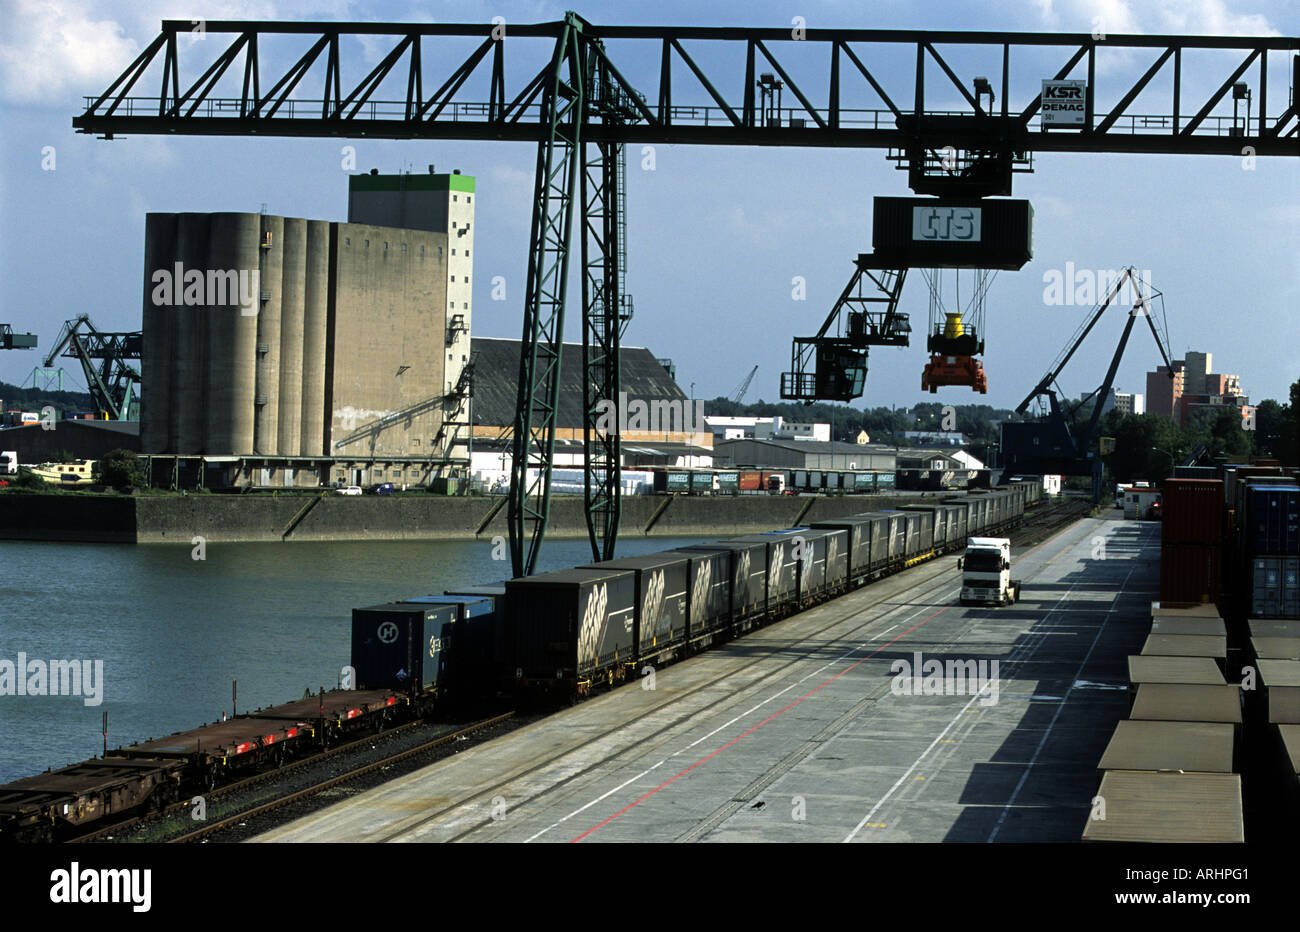 Niehl 1 container terminal on the river Rhine, Cologne, North Rhine-Westphalia, Germany. Stock Photo